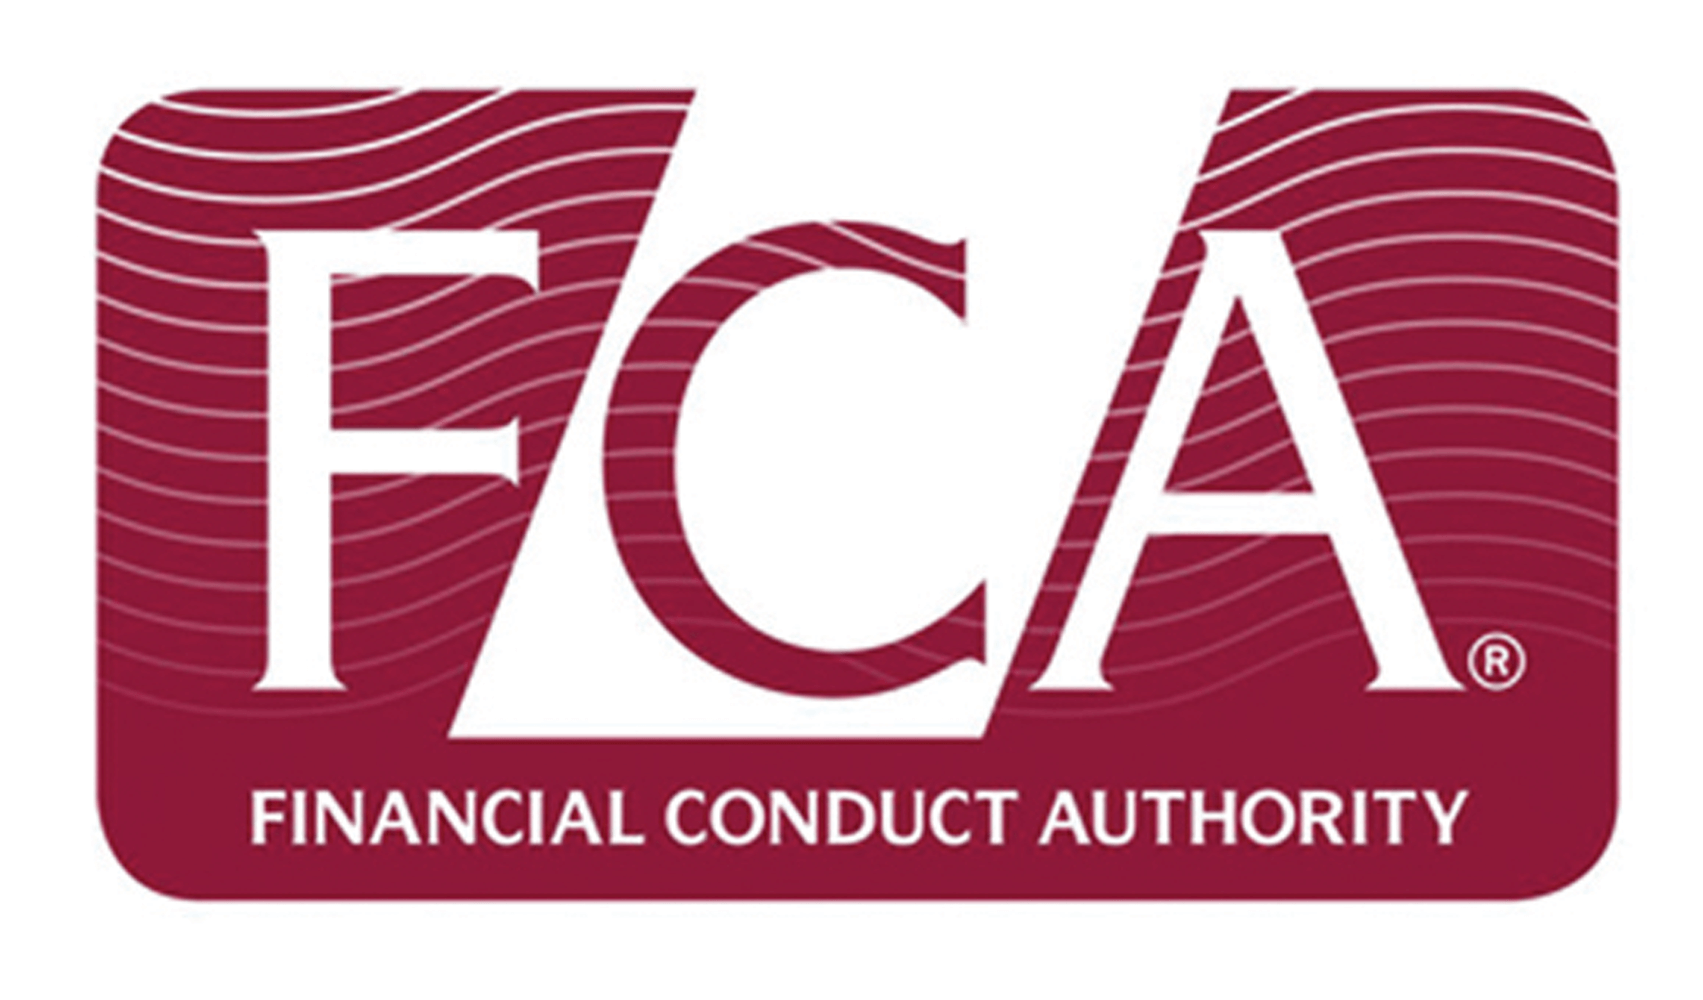 Fca Publishes Decision Notice Against Former Ceo Of Sonali Bank